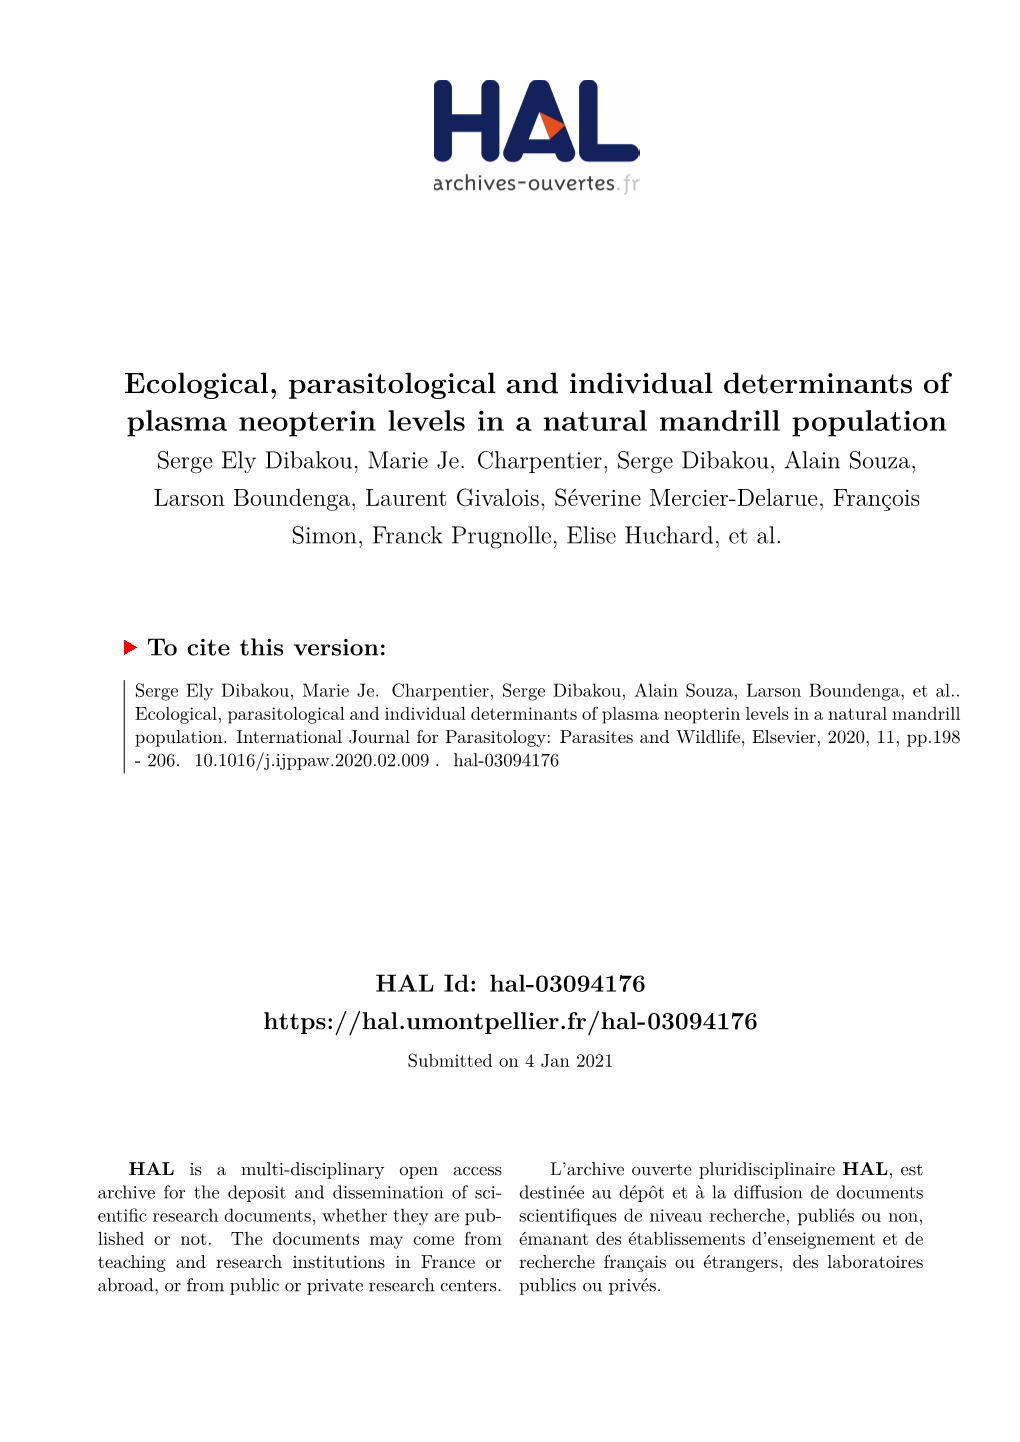 Ecological, Parasitological and Individual Determinants of Plasma Neopterin Levels in a Natural Mandrill Population Serge Ely Dibakou, Marie Je